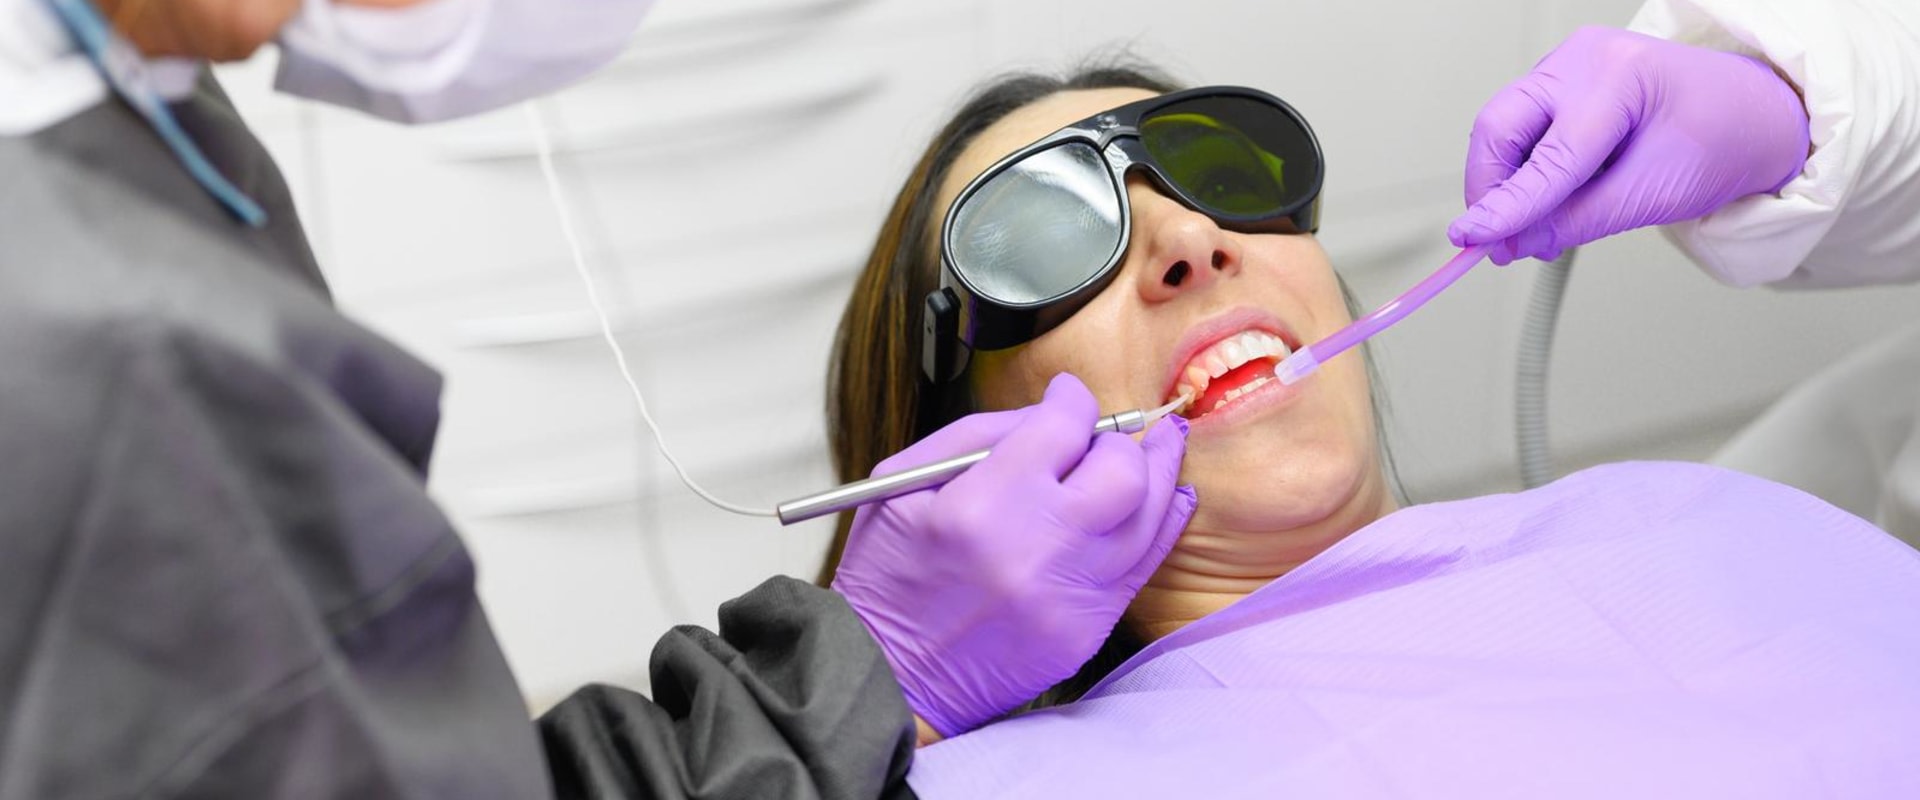 Say Goodbye To Fear: How Laser Dentistry Is Making Dental Visits Easier For Families In San Antonio, TX